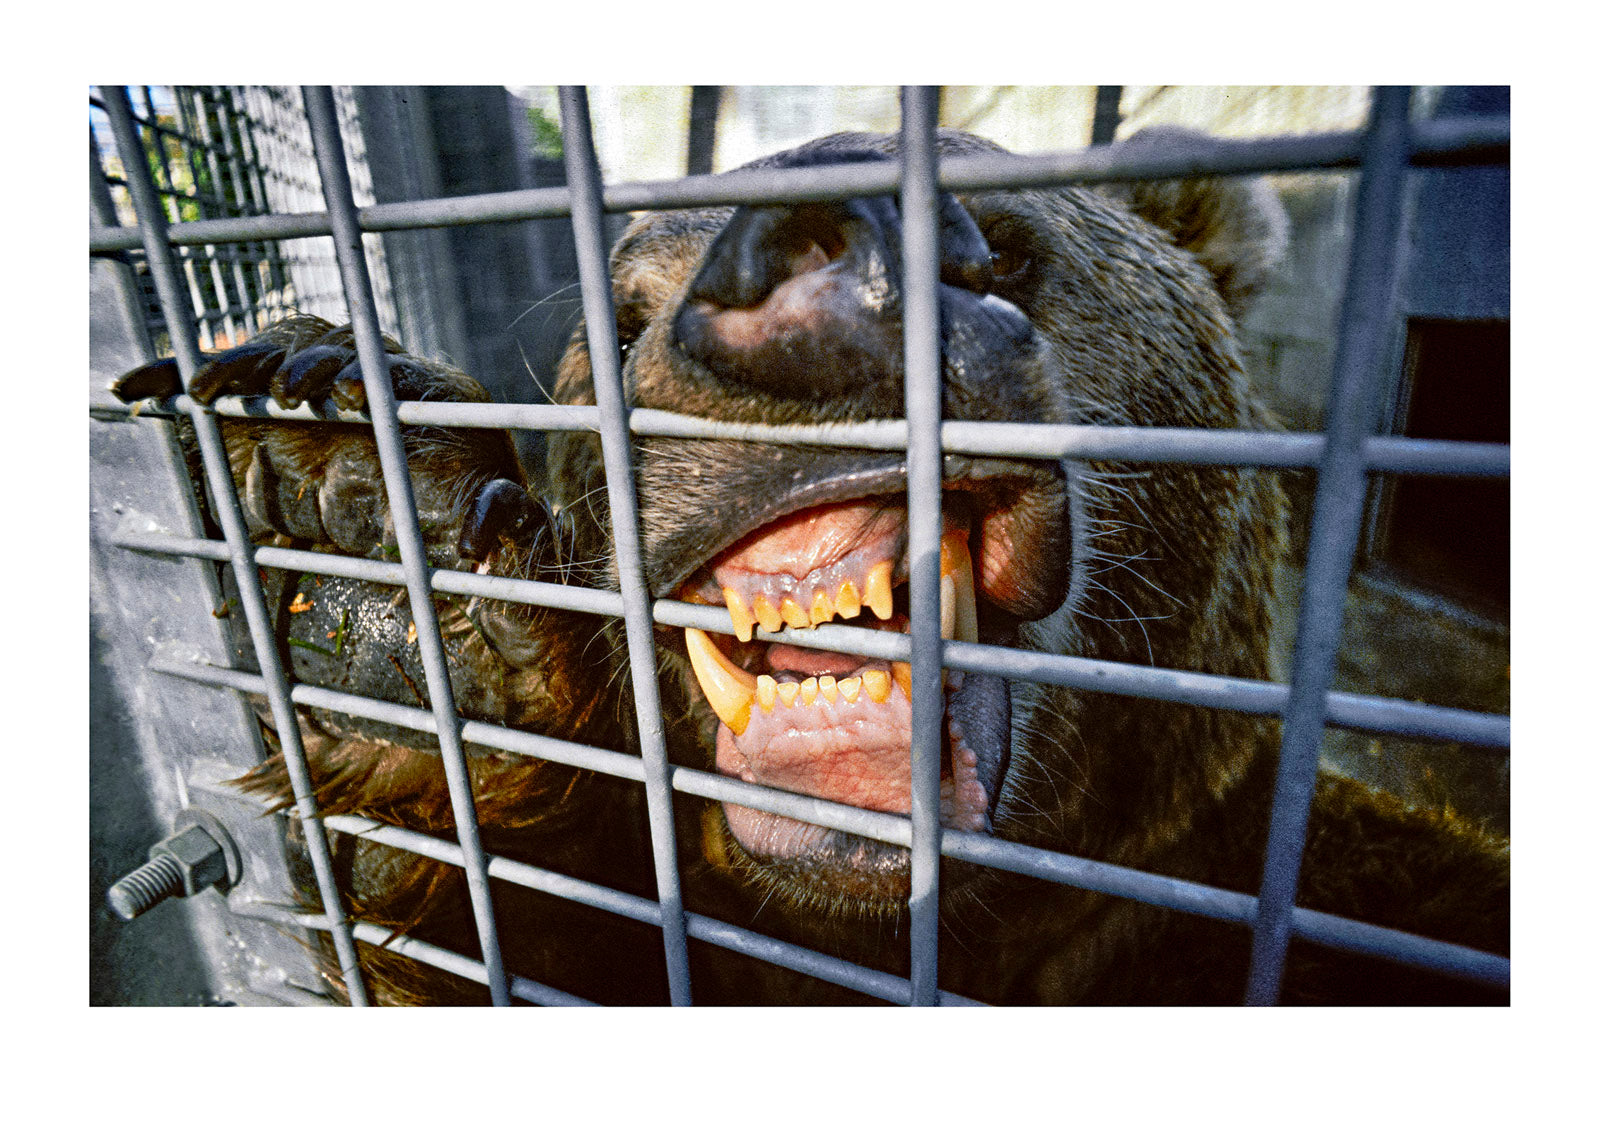 An endangered Syrian Brown Bear chewing at it's steel cage. Zoological, Board of Victoria, Victoria, Australia.